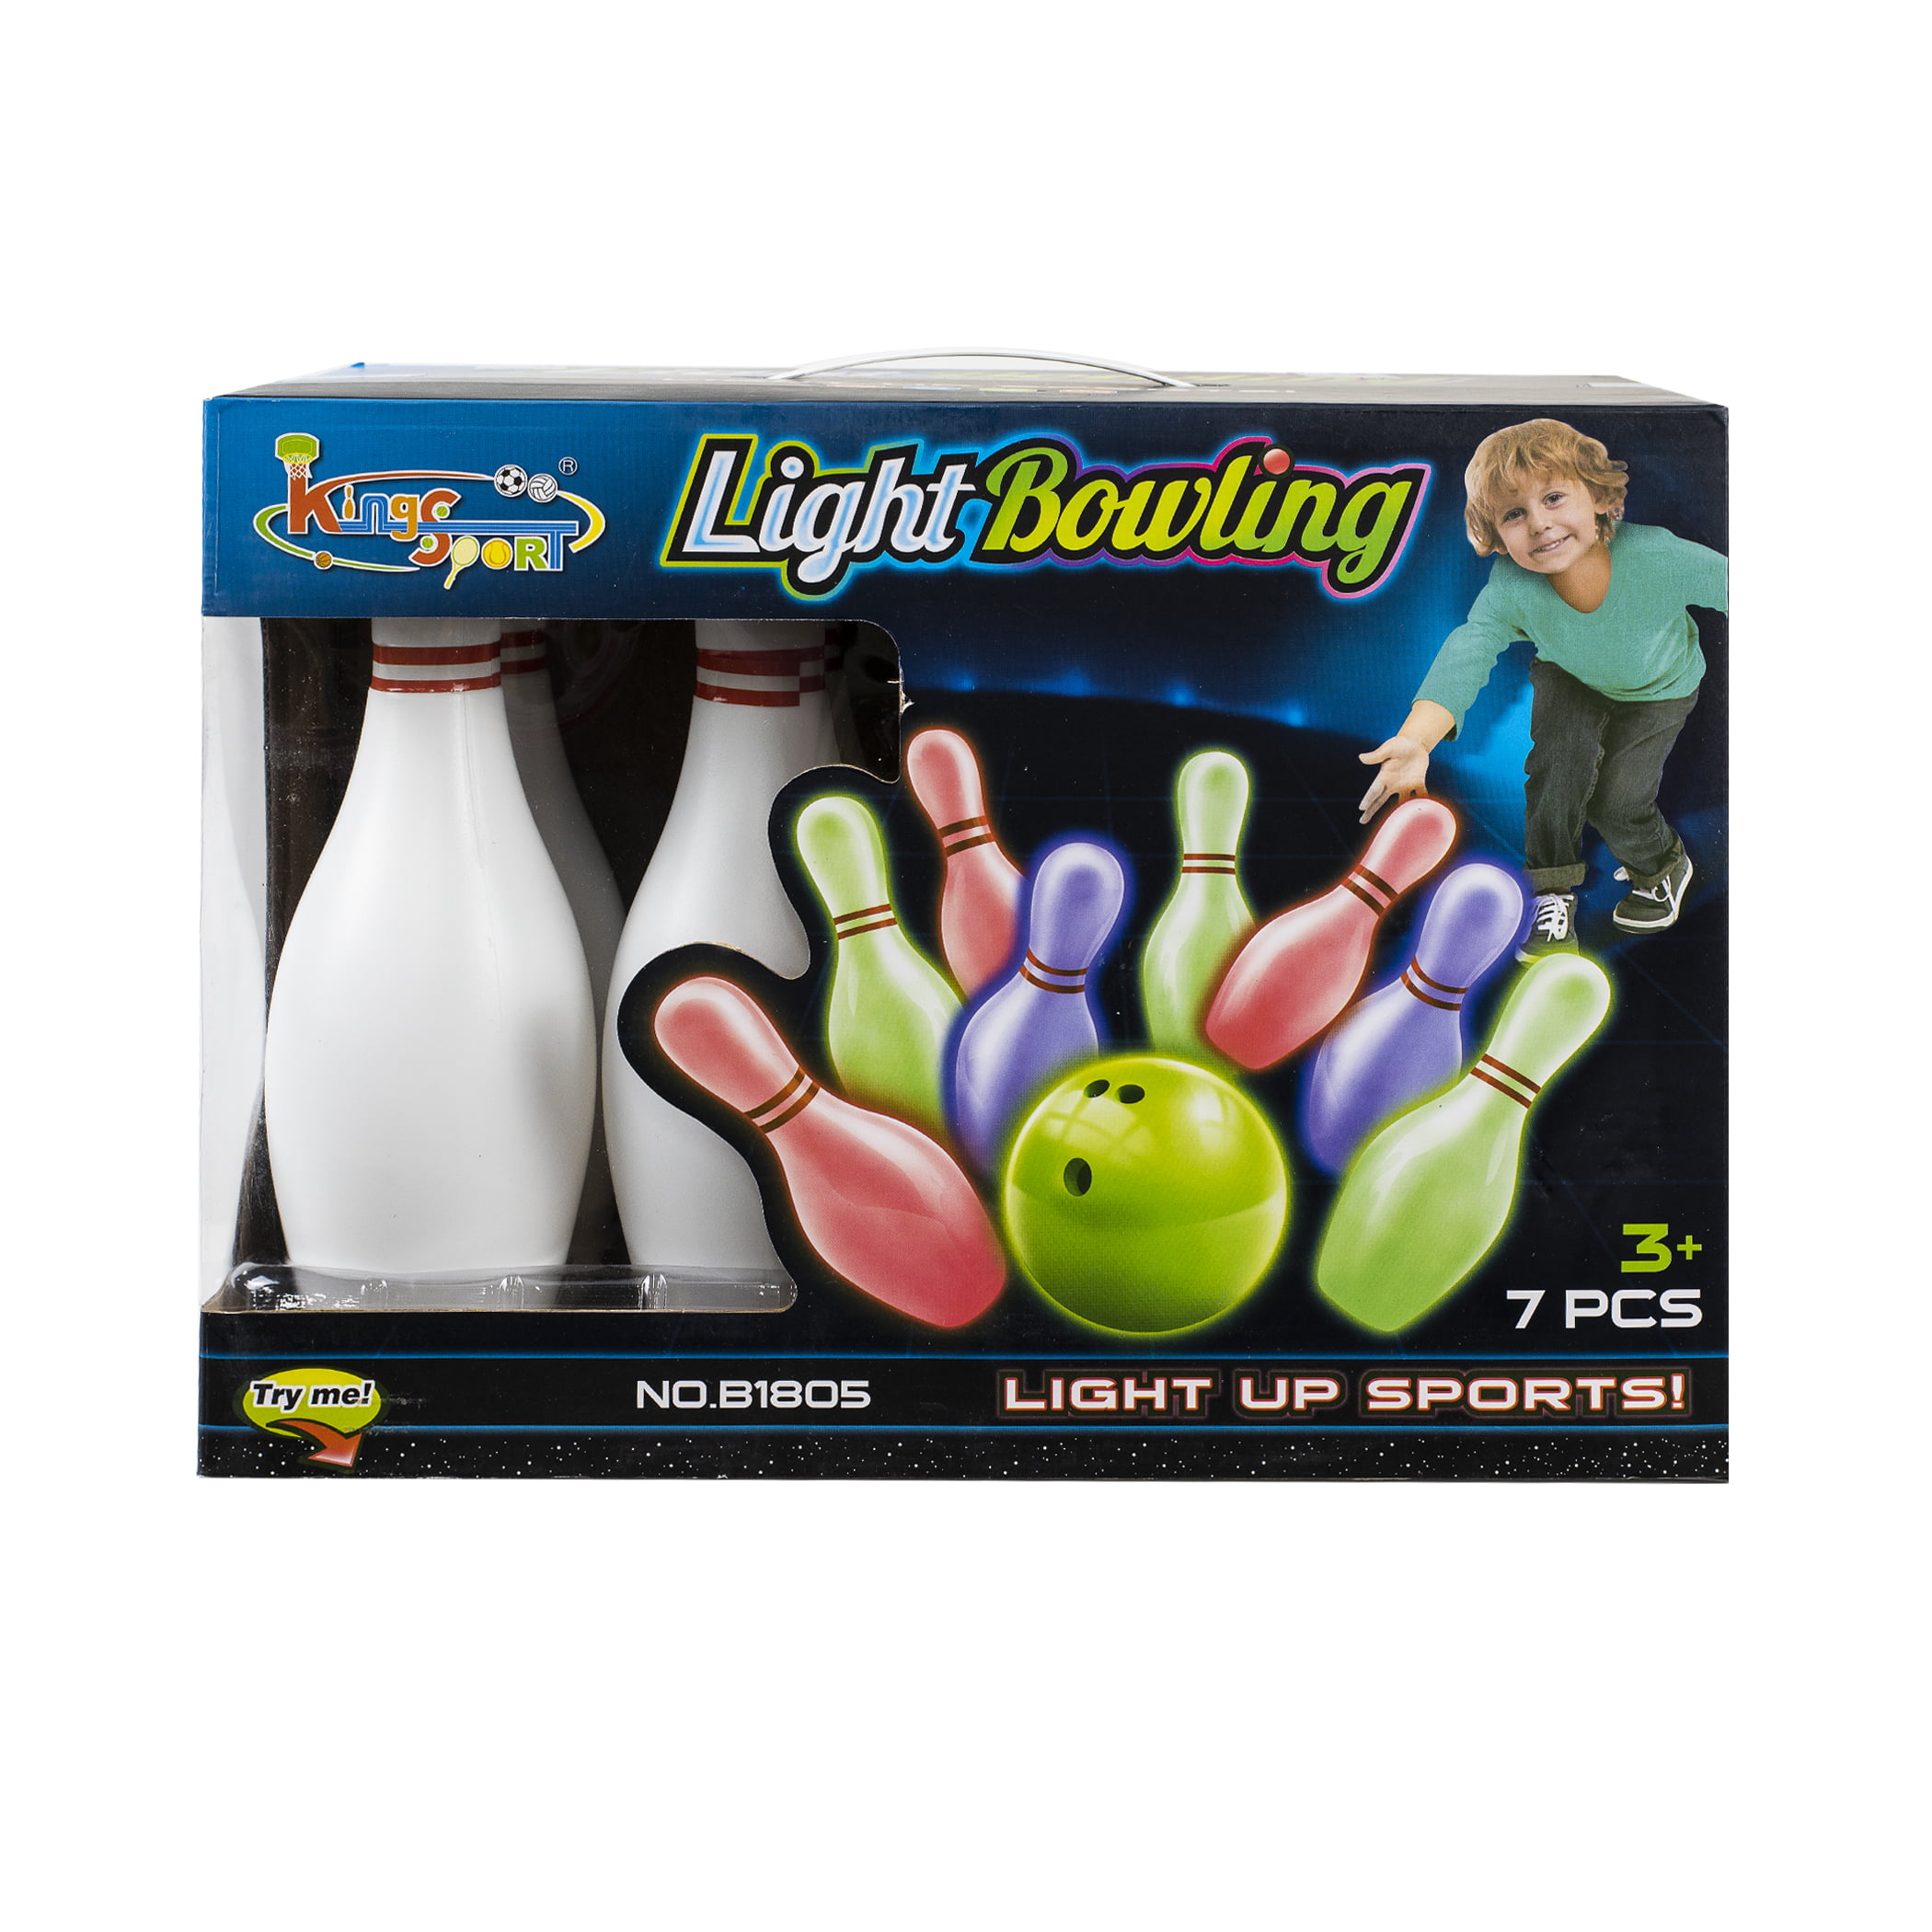 BOYS GIRLS MULTICOLOUR FLASHING 8 LIGHT UP BOWLING SET WITH CARRY CADDY 